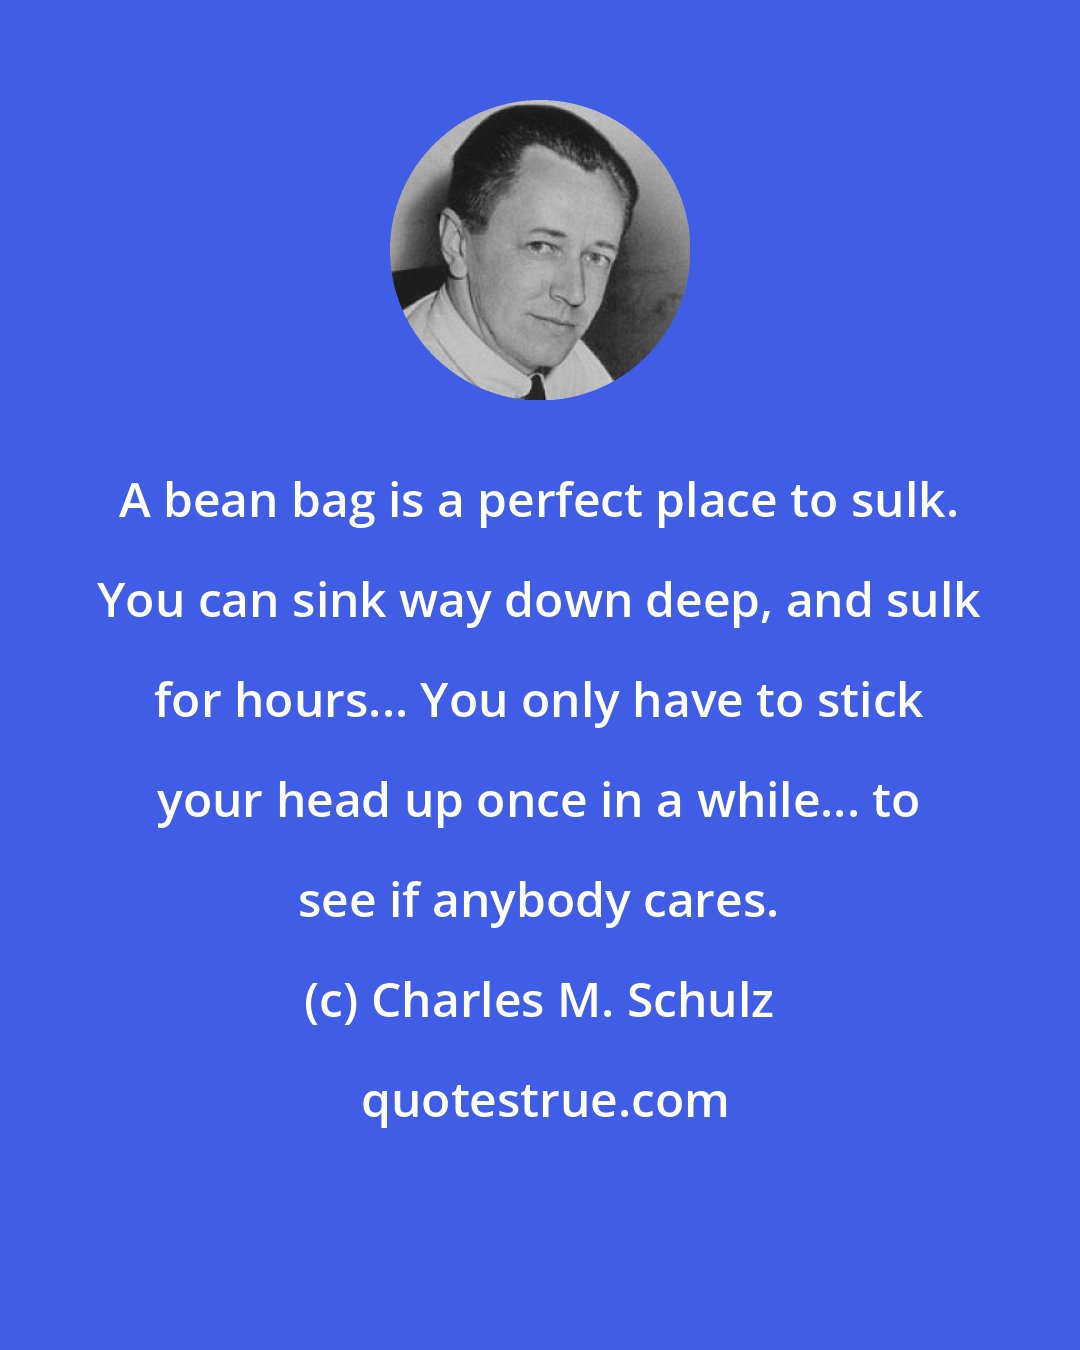 Charles M. Schulz: A bean bag is a perfect place to sulk. You can sink way down deep, and sulk for hours... You only have to stick your head up once in a while... to see if anybody cares.